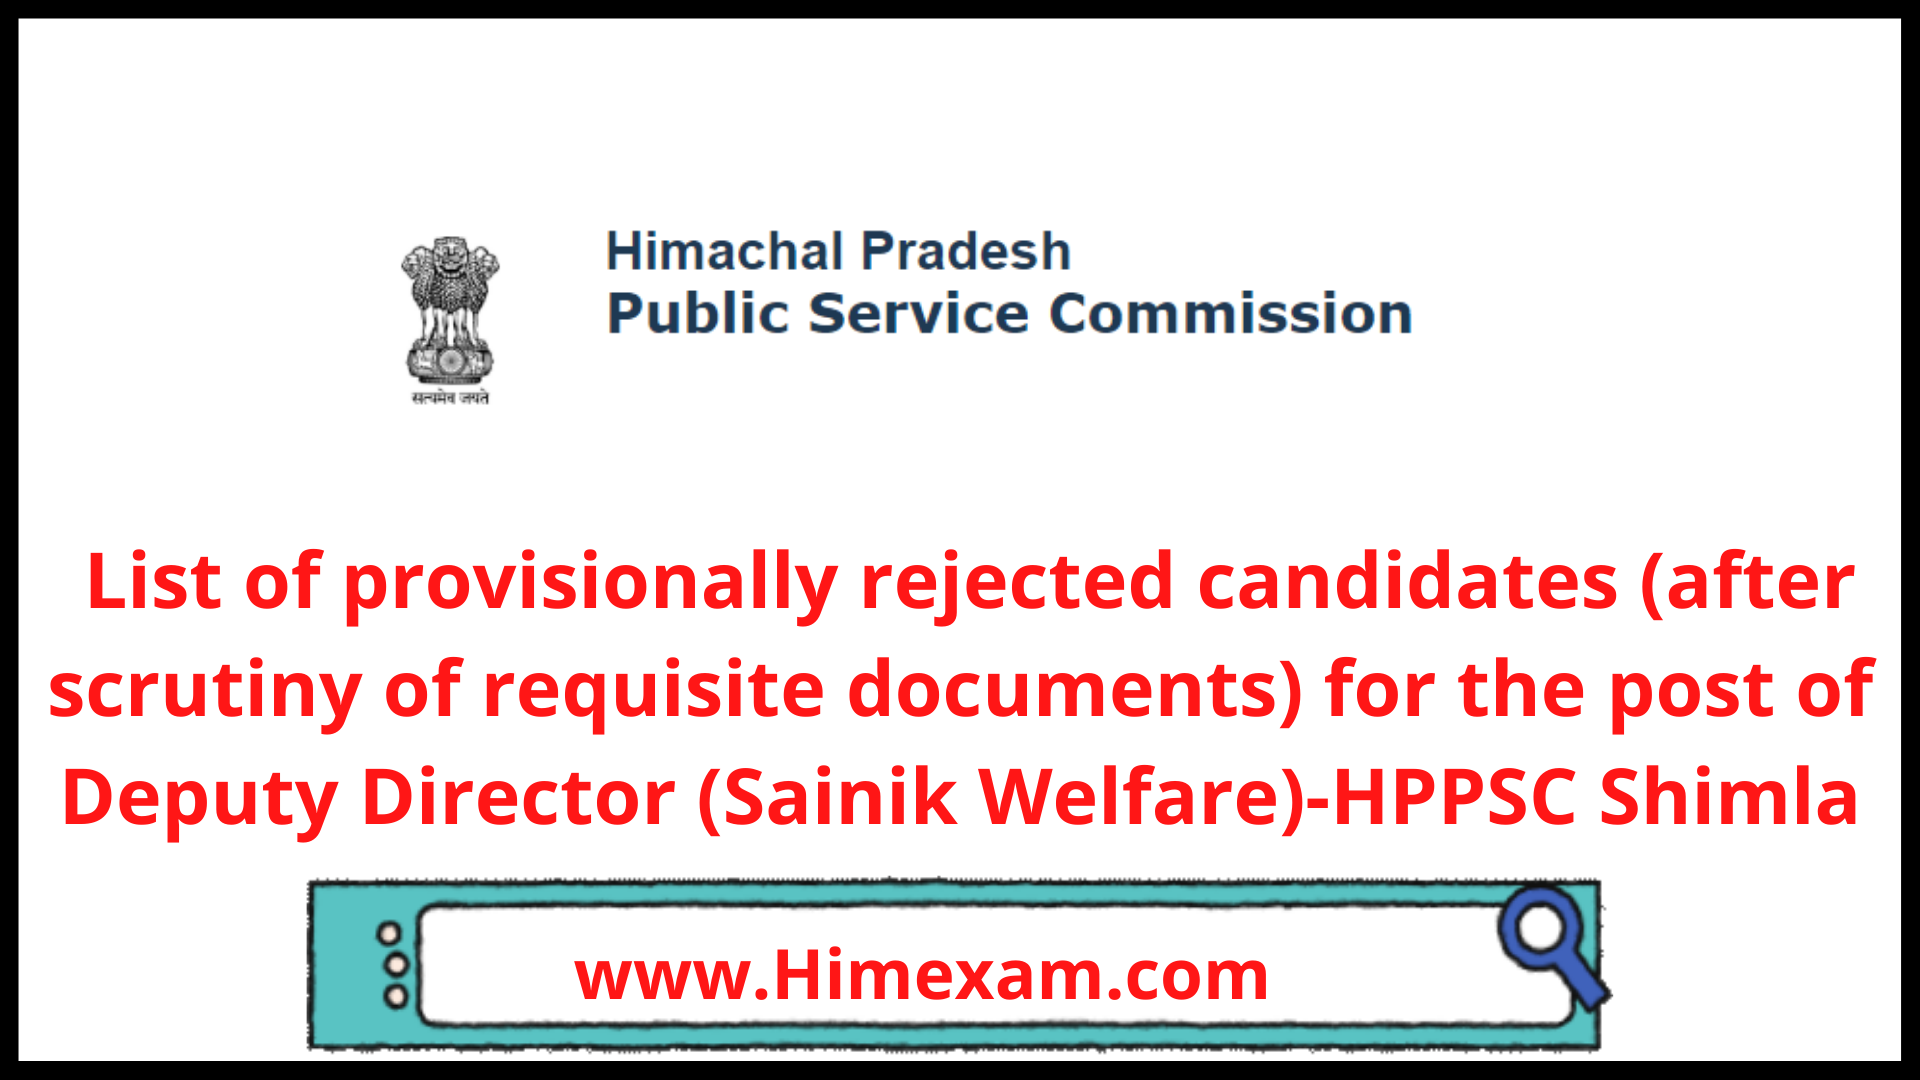 List of provisionally rejected candidates (after scrutiny of requisite documents) for the post of Deputy Director (Sainik Welfare)-HPPSC Shimla